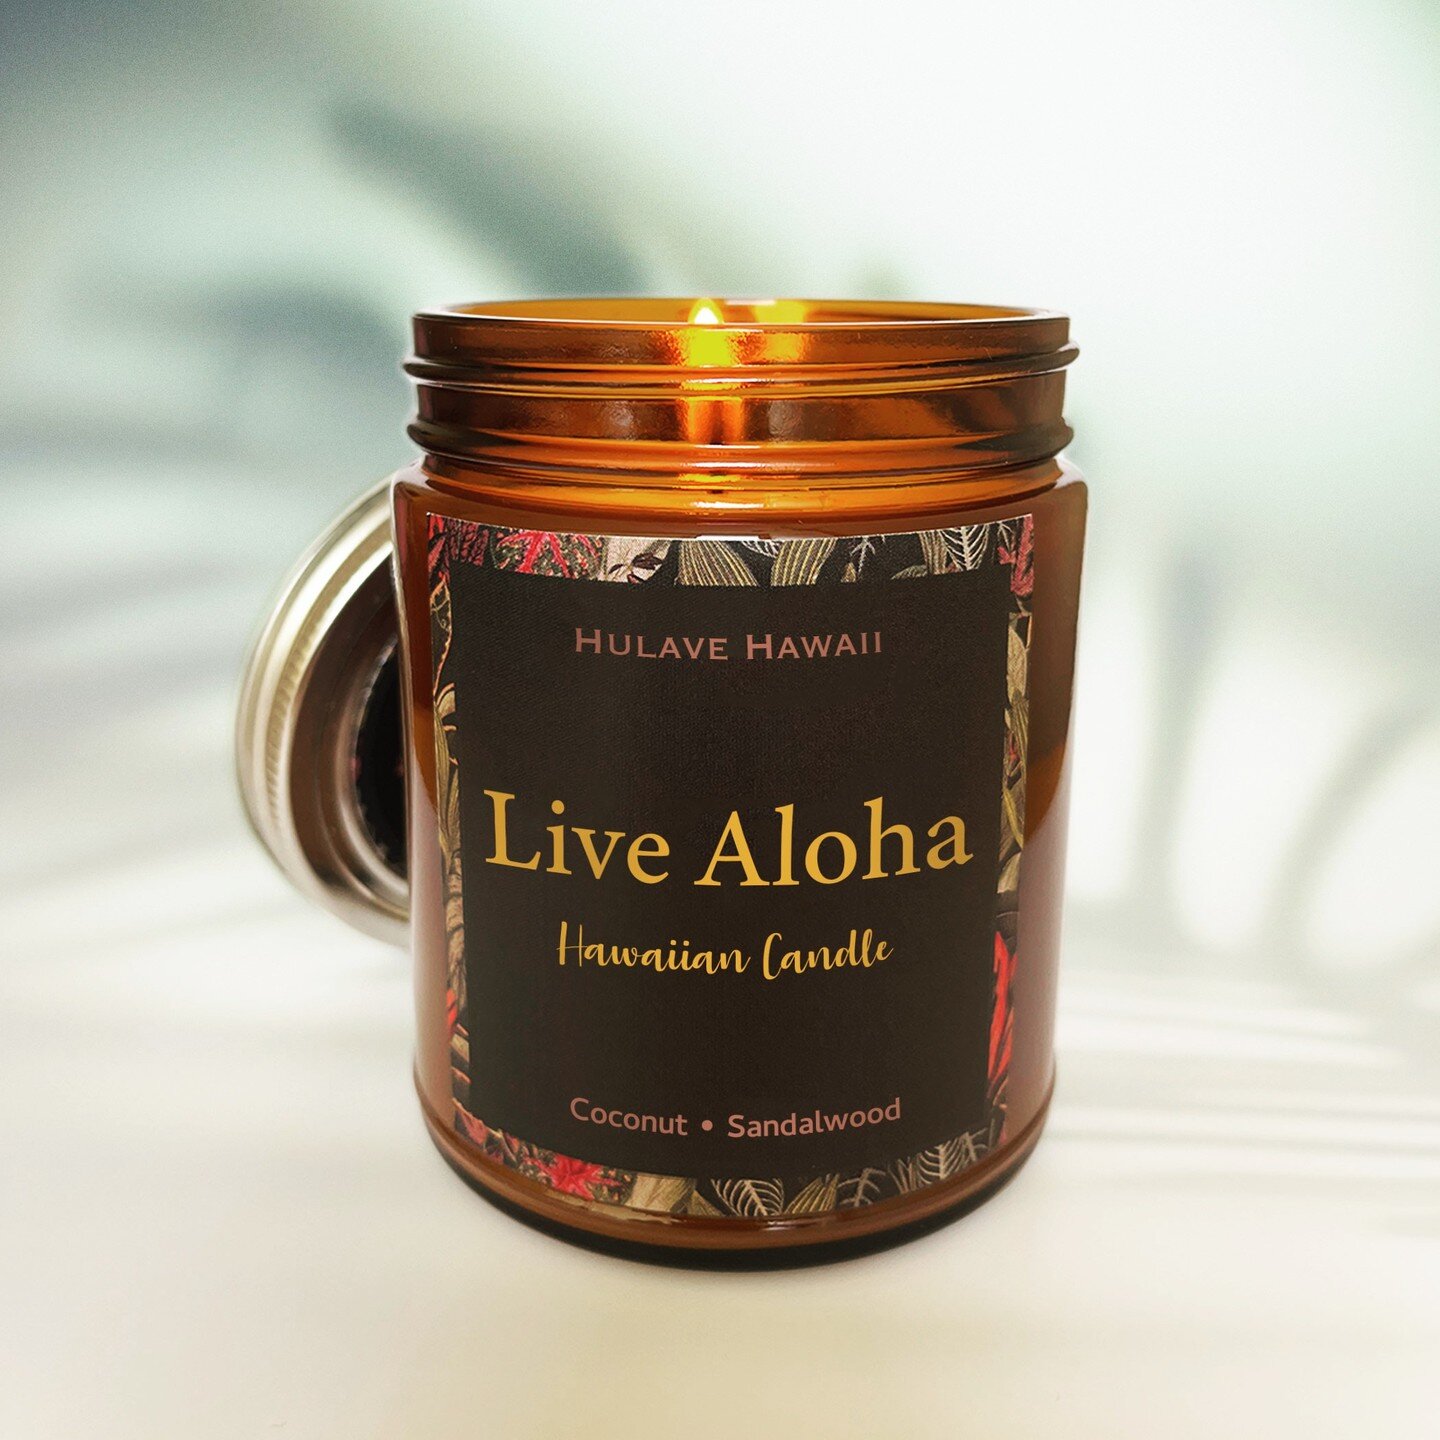 Transport yourself to tranquil Hawaiian beaches with our captivating blend of creamy coconut and warm sandalwood. Embrace relaxation and the spirit of aloha in your own tropical oasis. Now Available at Etsy store and our website #EscapeToHawaii #Sere